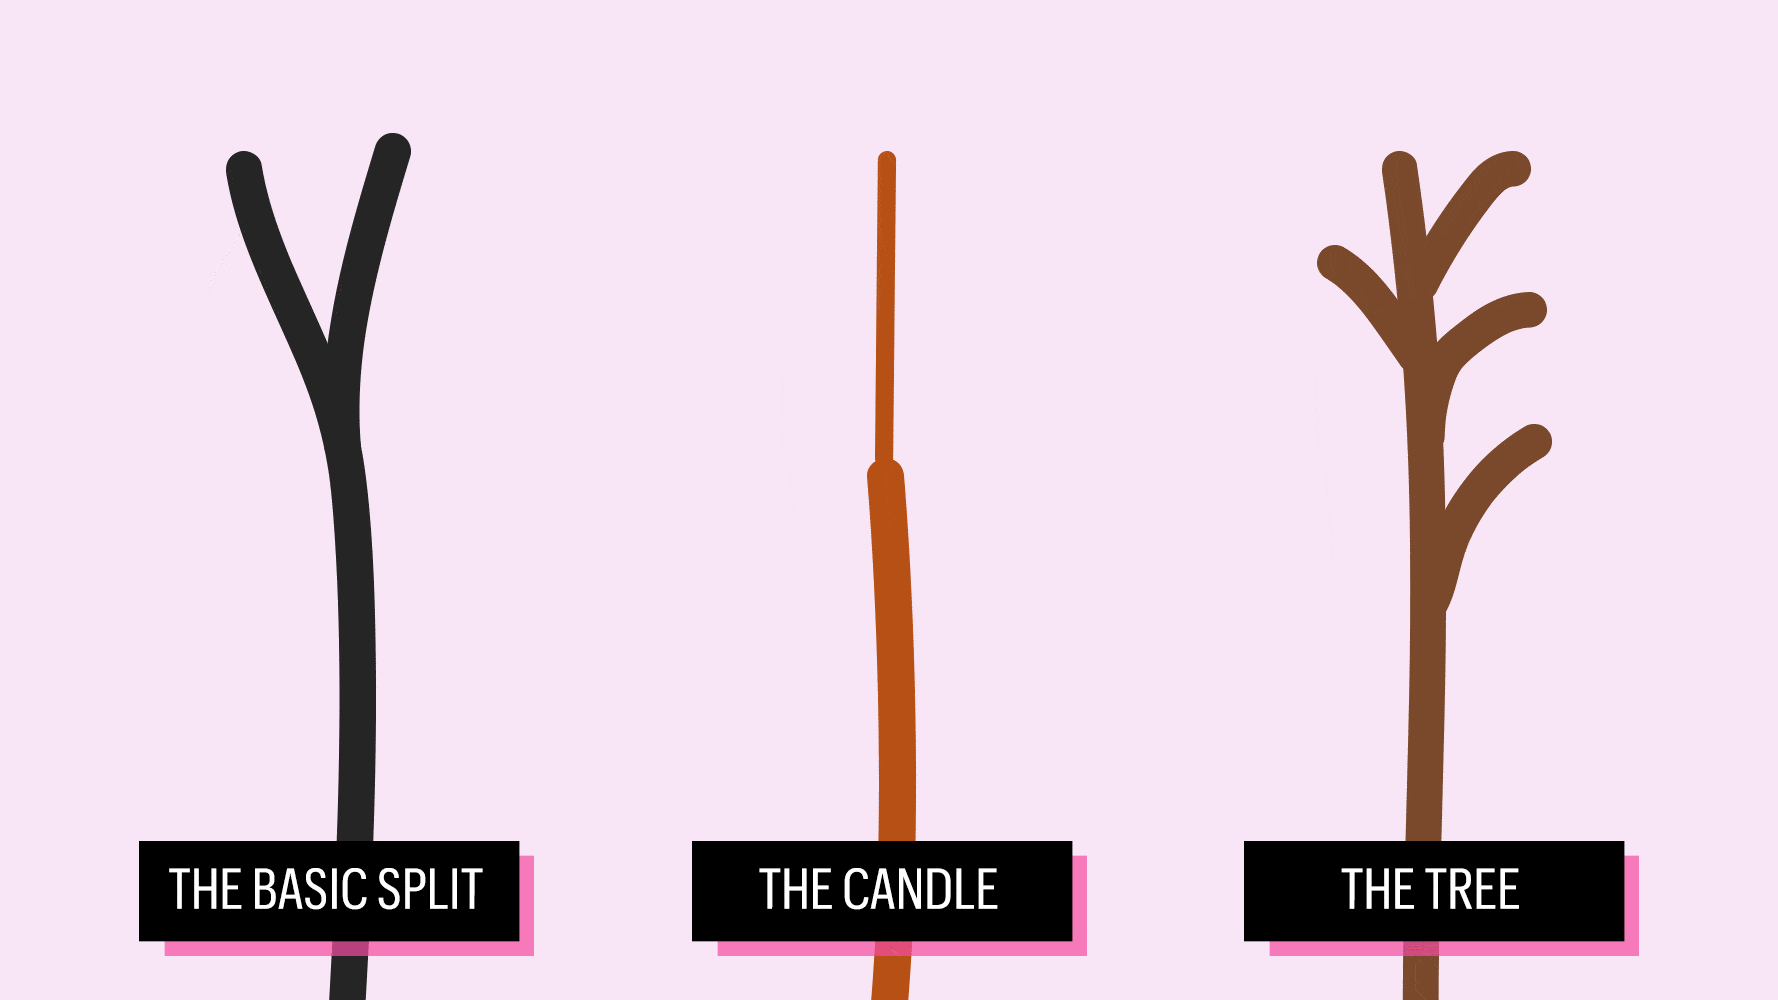 Different Types of Split Ends and What They Mean